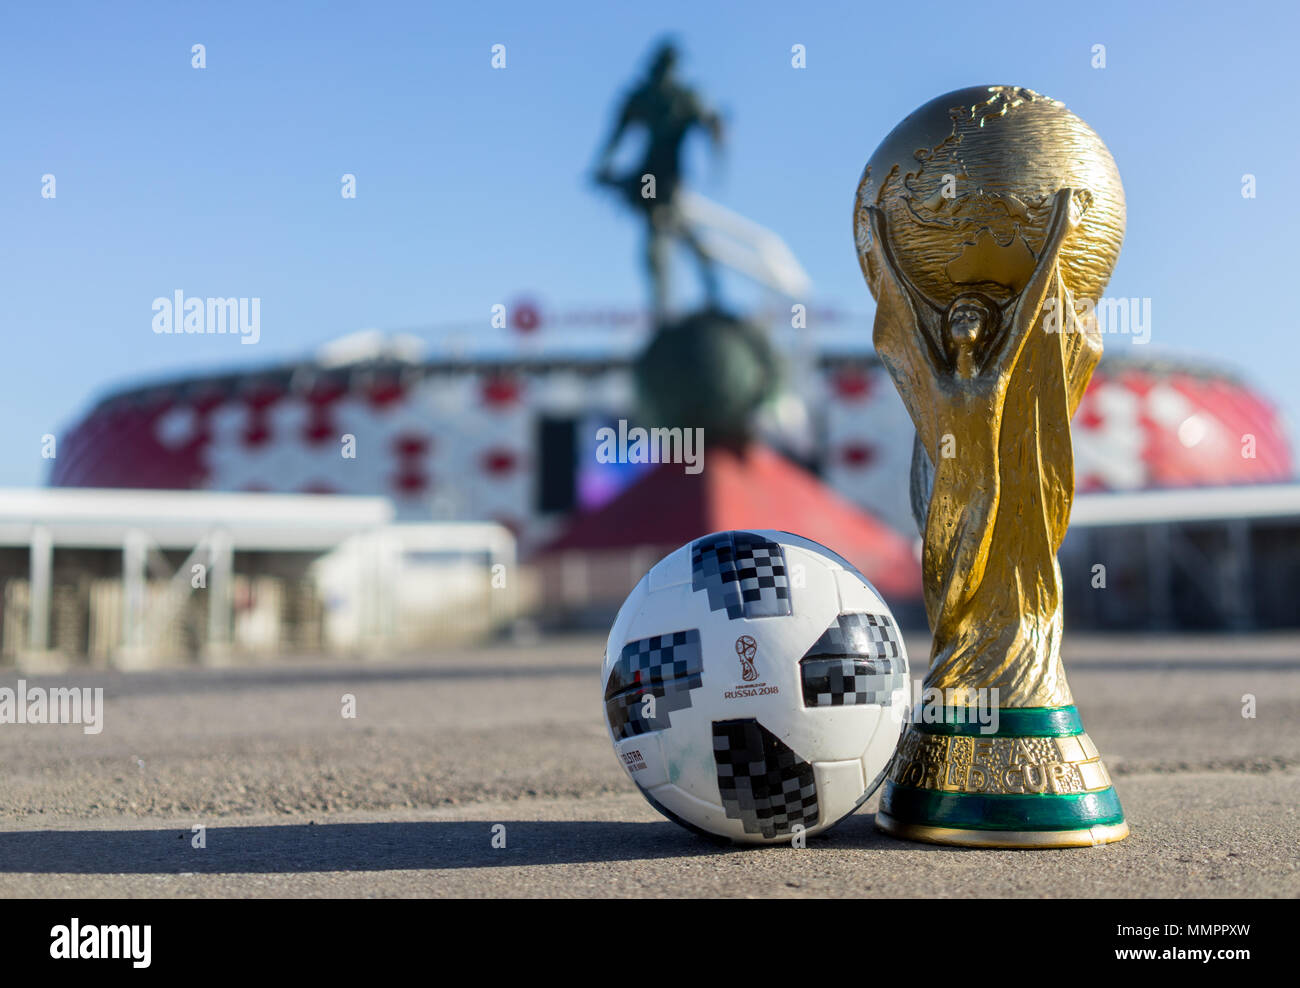 April 9, 2018 Moscow, Russia Trophy of the FIFA World Cup and official ball of FIFA World Cup 2018 Adidas Telstar 18 against the backdrop of the Spart Stock Photo